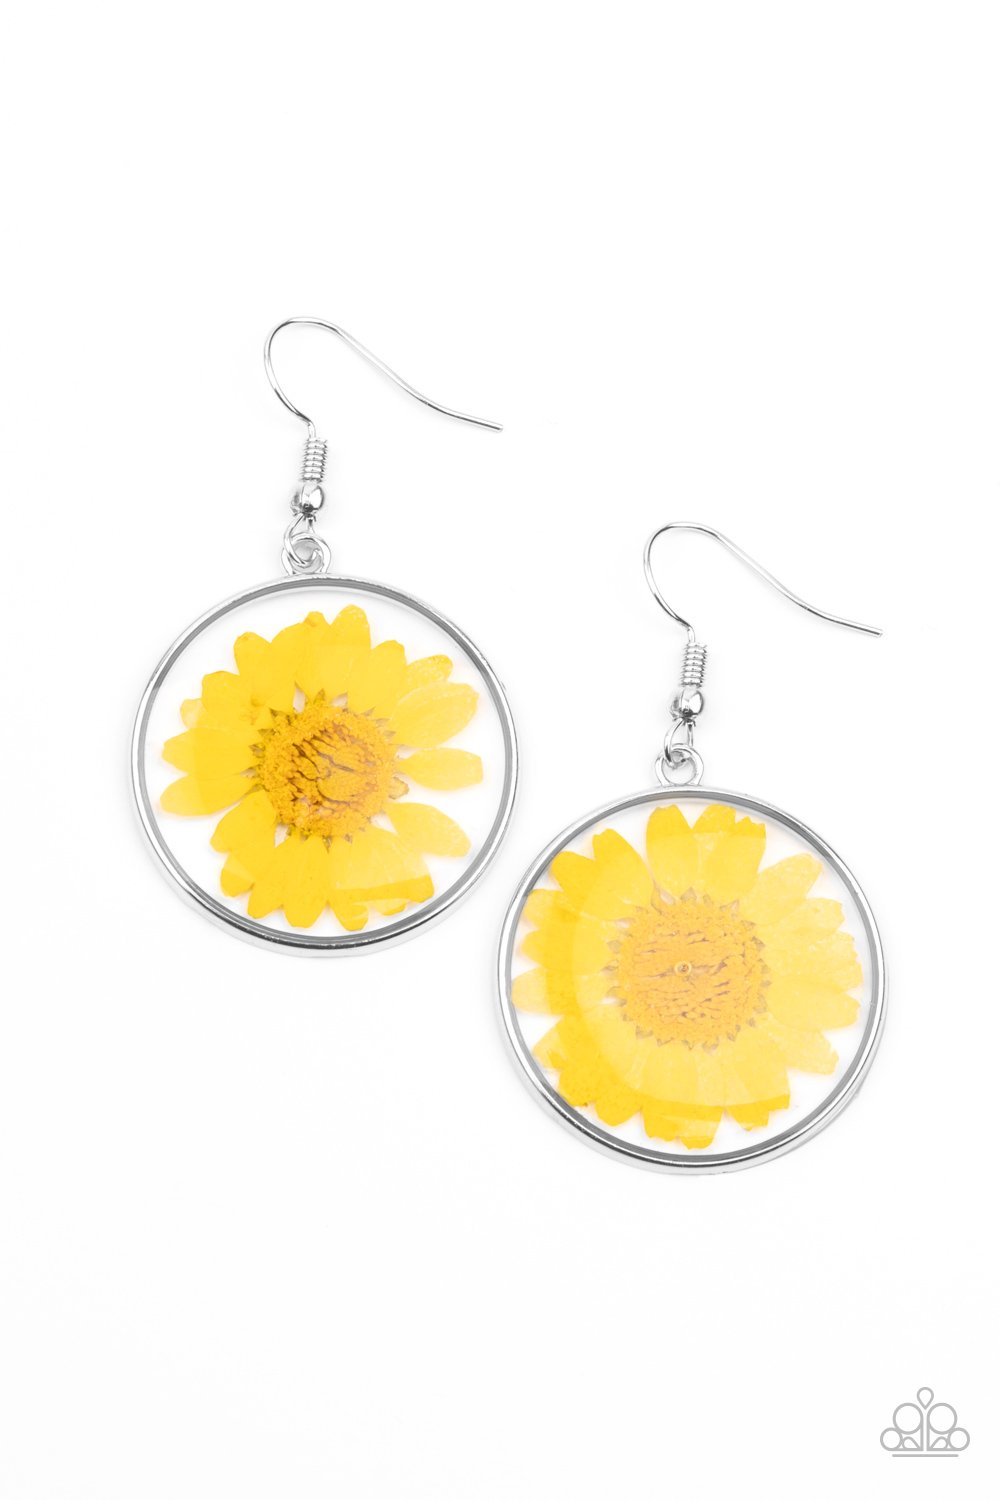 &lt;p&gt; Bordered in a silver fitting, a pressed yellow daisy is encased inside a glassy frame for an enchanted floral look. Earring attaches to a standard fishhook fitting.
&lt;/p&gt;  

&lt;p&gt; &lt;i&gt;  Sold as one pair of earrings. &lt;/i&gt;  &lt;/p&gt;


&lt;img src=\&quot;https://d9b54x484lq62.cloudfront.net/paparazzi/shopping/images/517_tag150x115_1.png\&quot; alt=\&quot;New Kit\&quot; align=\&quot;middle\&quot; height=\&quot;50\&quot; width=\&quot;50\&quot;&gt;